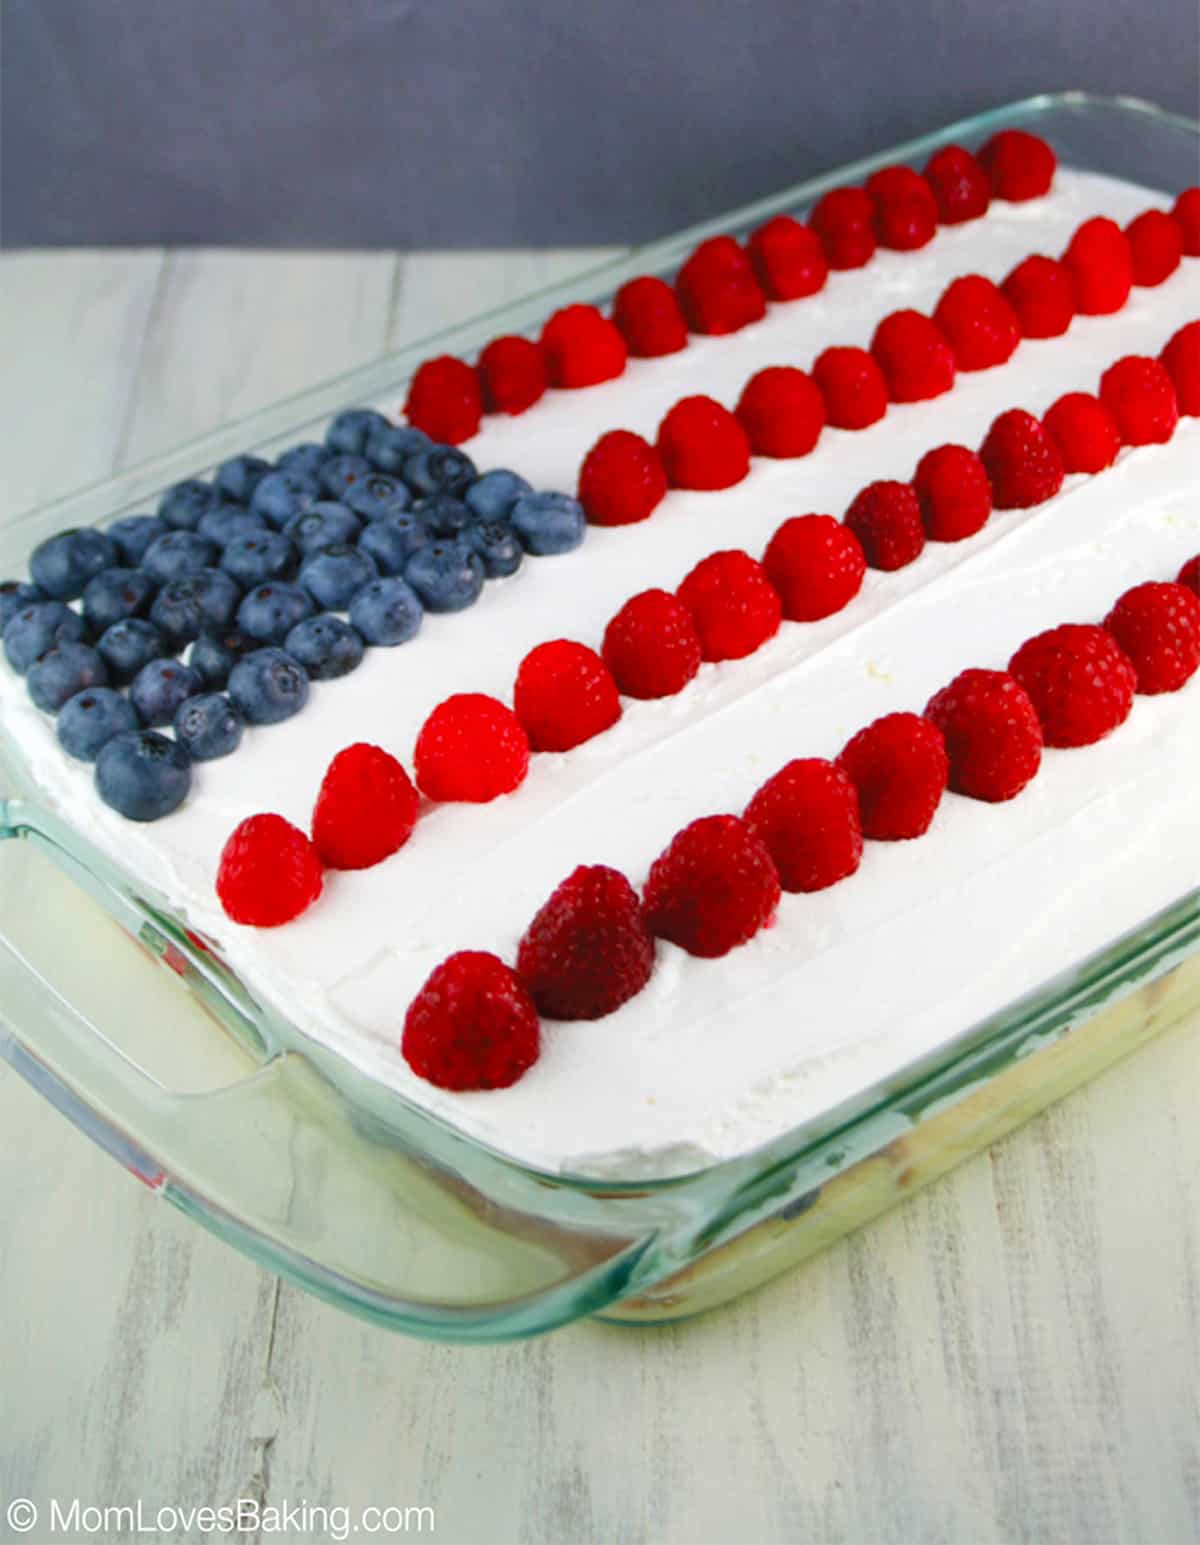 Clear glass casserole dish with layered dessert frosted with cool whip and flag design made of berries.